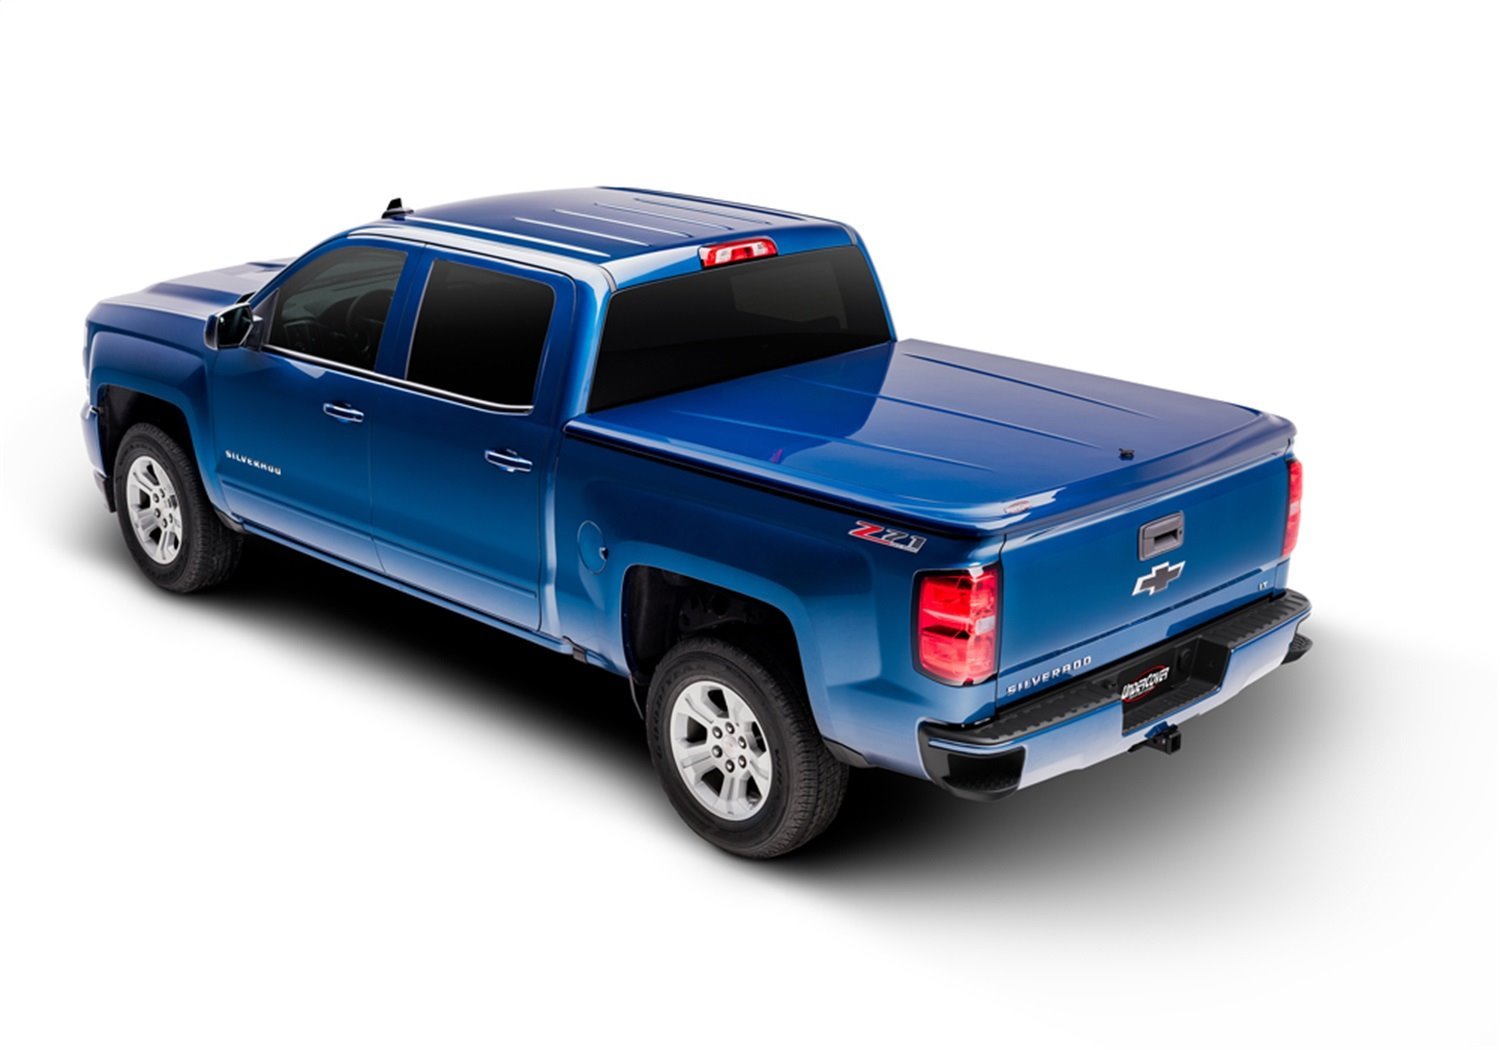 UC3076S SE Smooth Hard Non-Folding Cover, Select Ram 1500/2500/3500 6'4" Bed, w/o RamBox, Grey Smooth - Ready To Paint